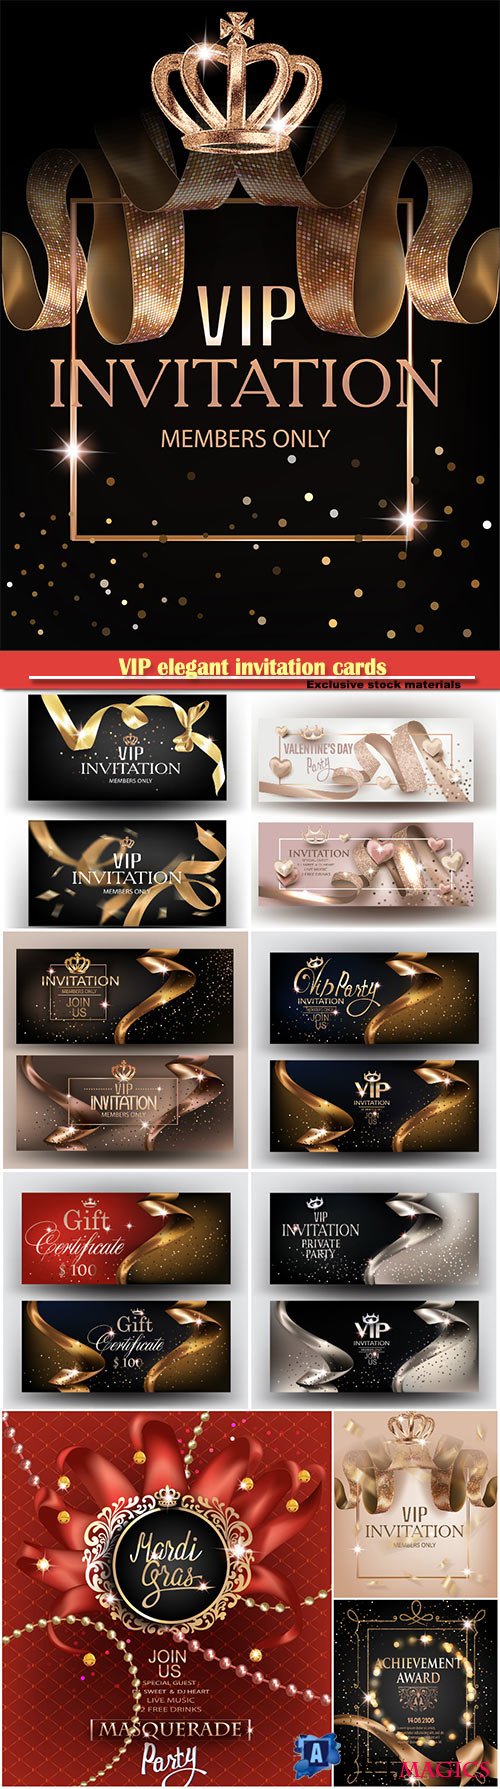 VIP elegant invitation cards with gold ribbons, pattern, crown and  frame and gold dust